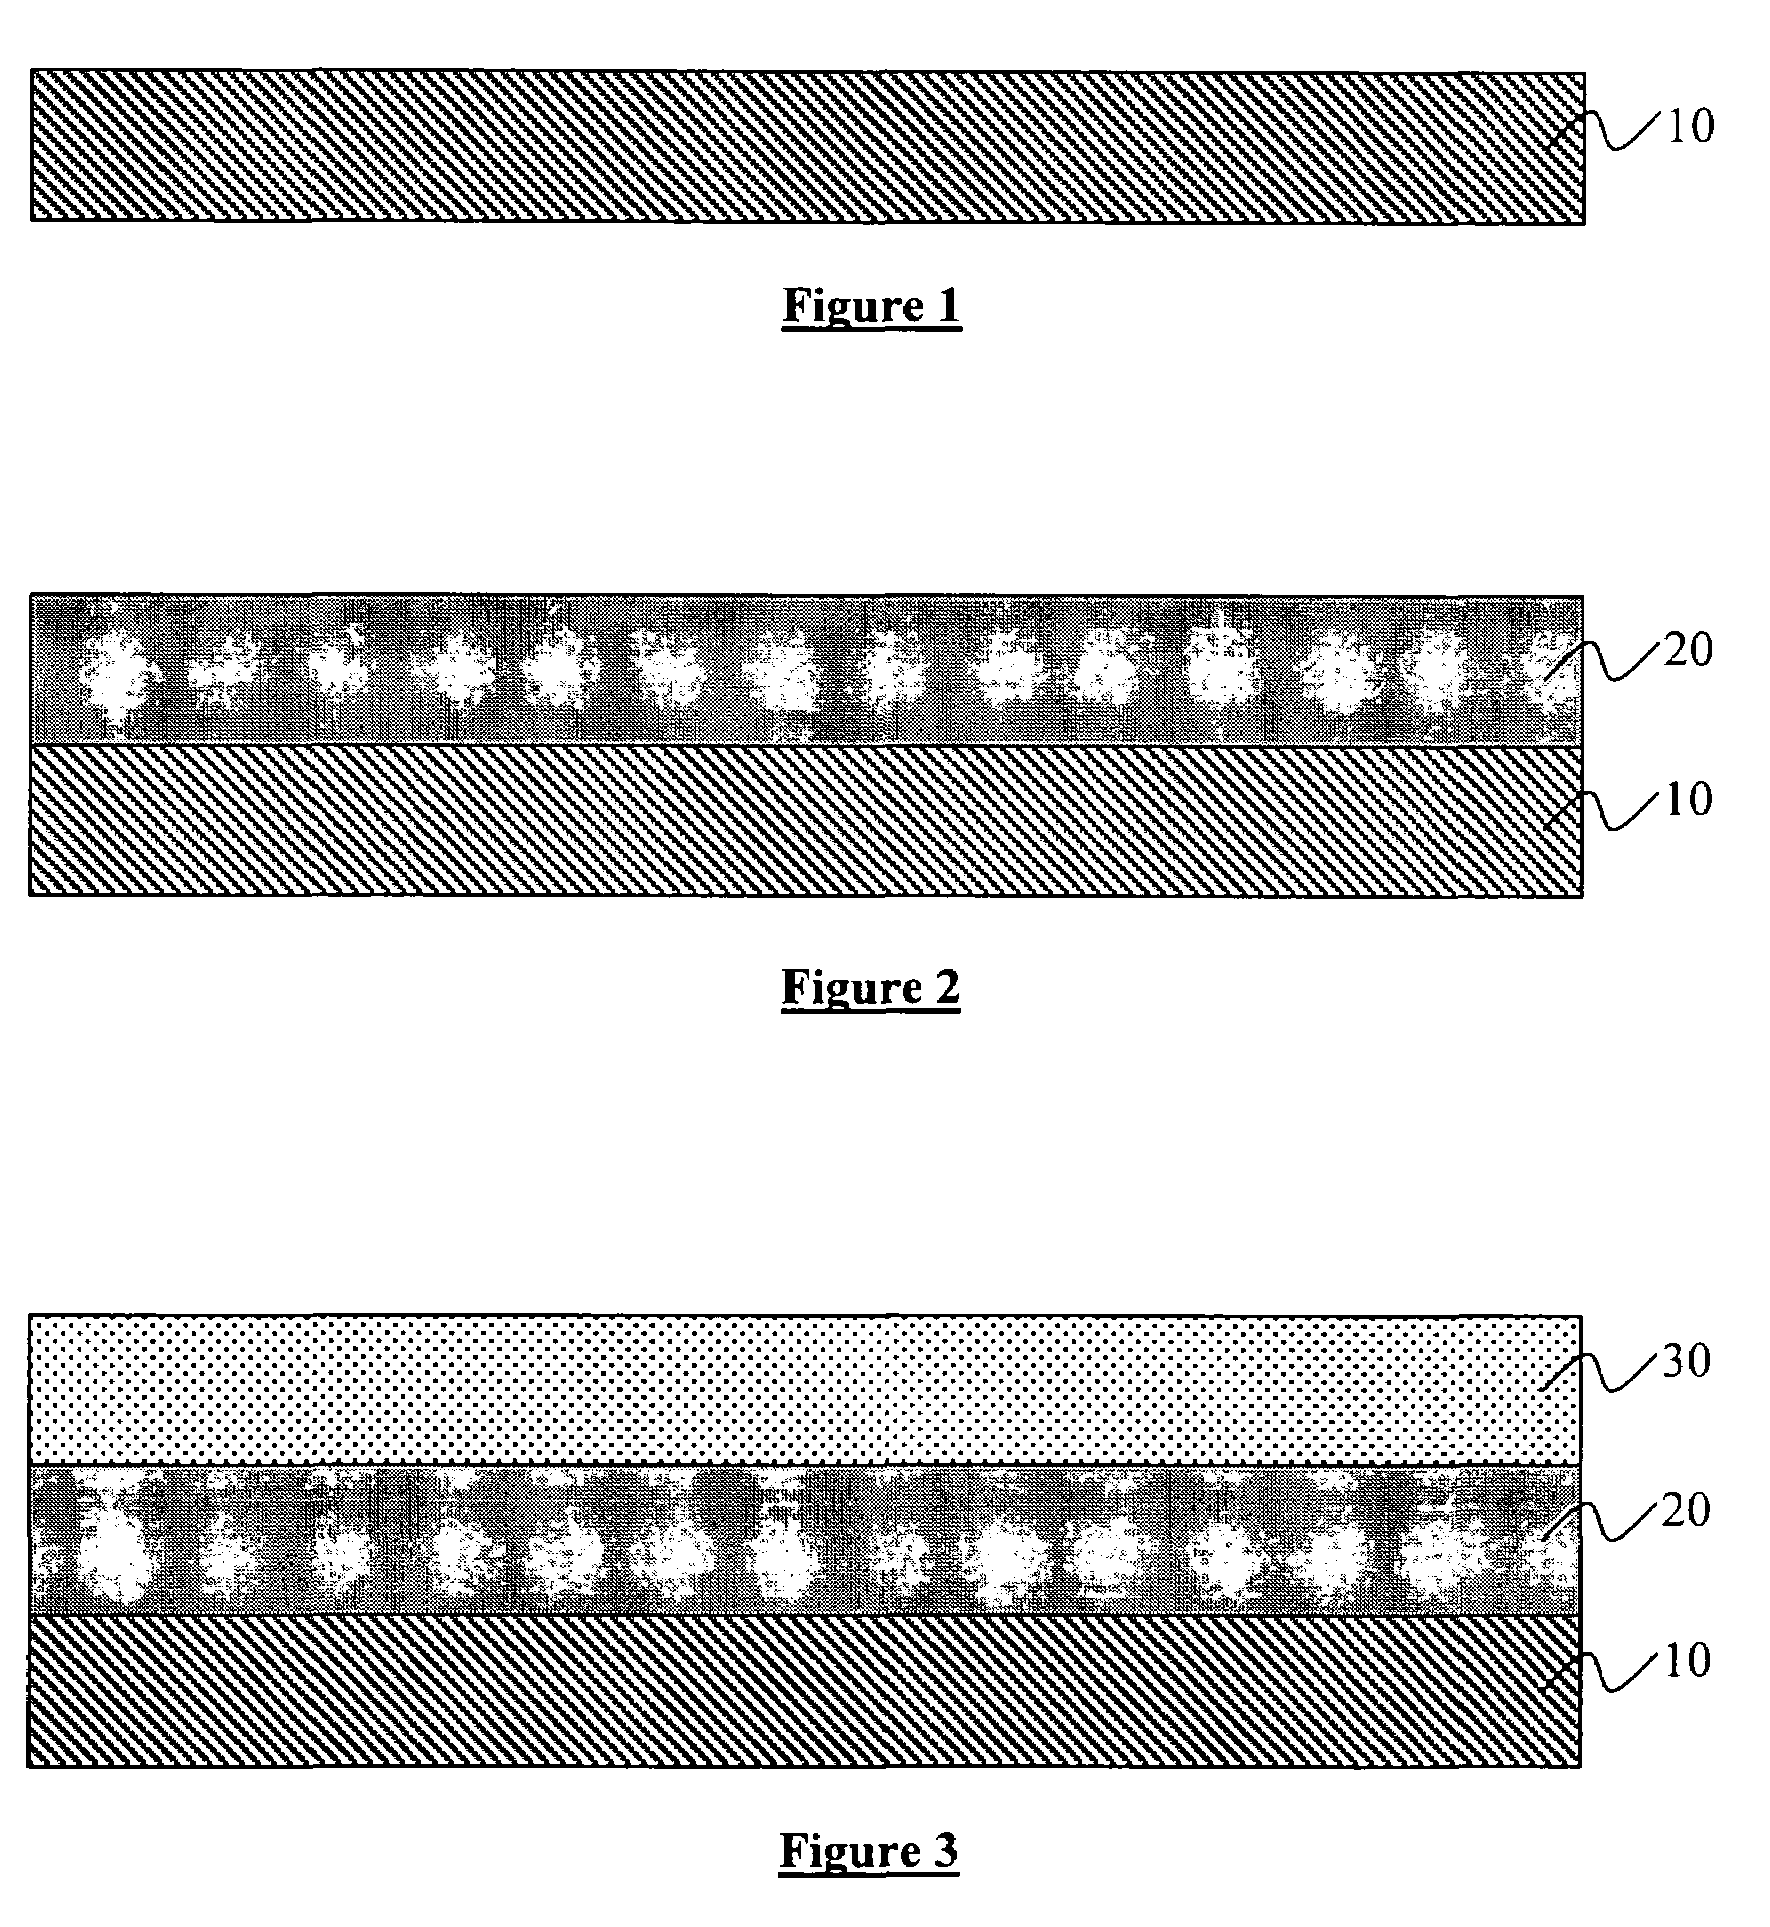 Method of fabricating sub-100 nanometer field emitter tips comprising group III-nitride semiconductors